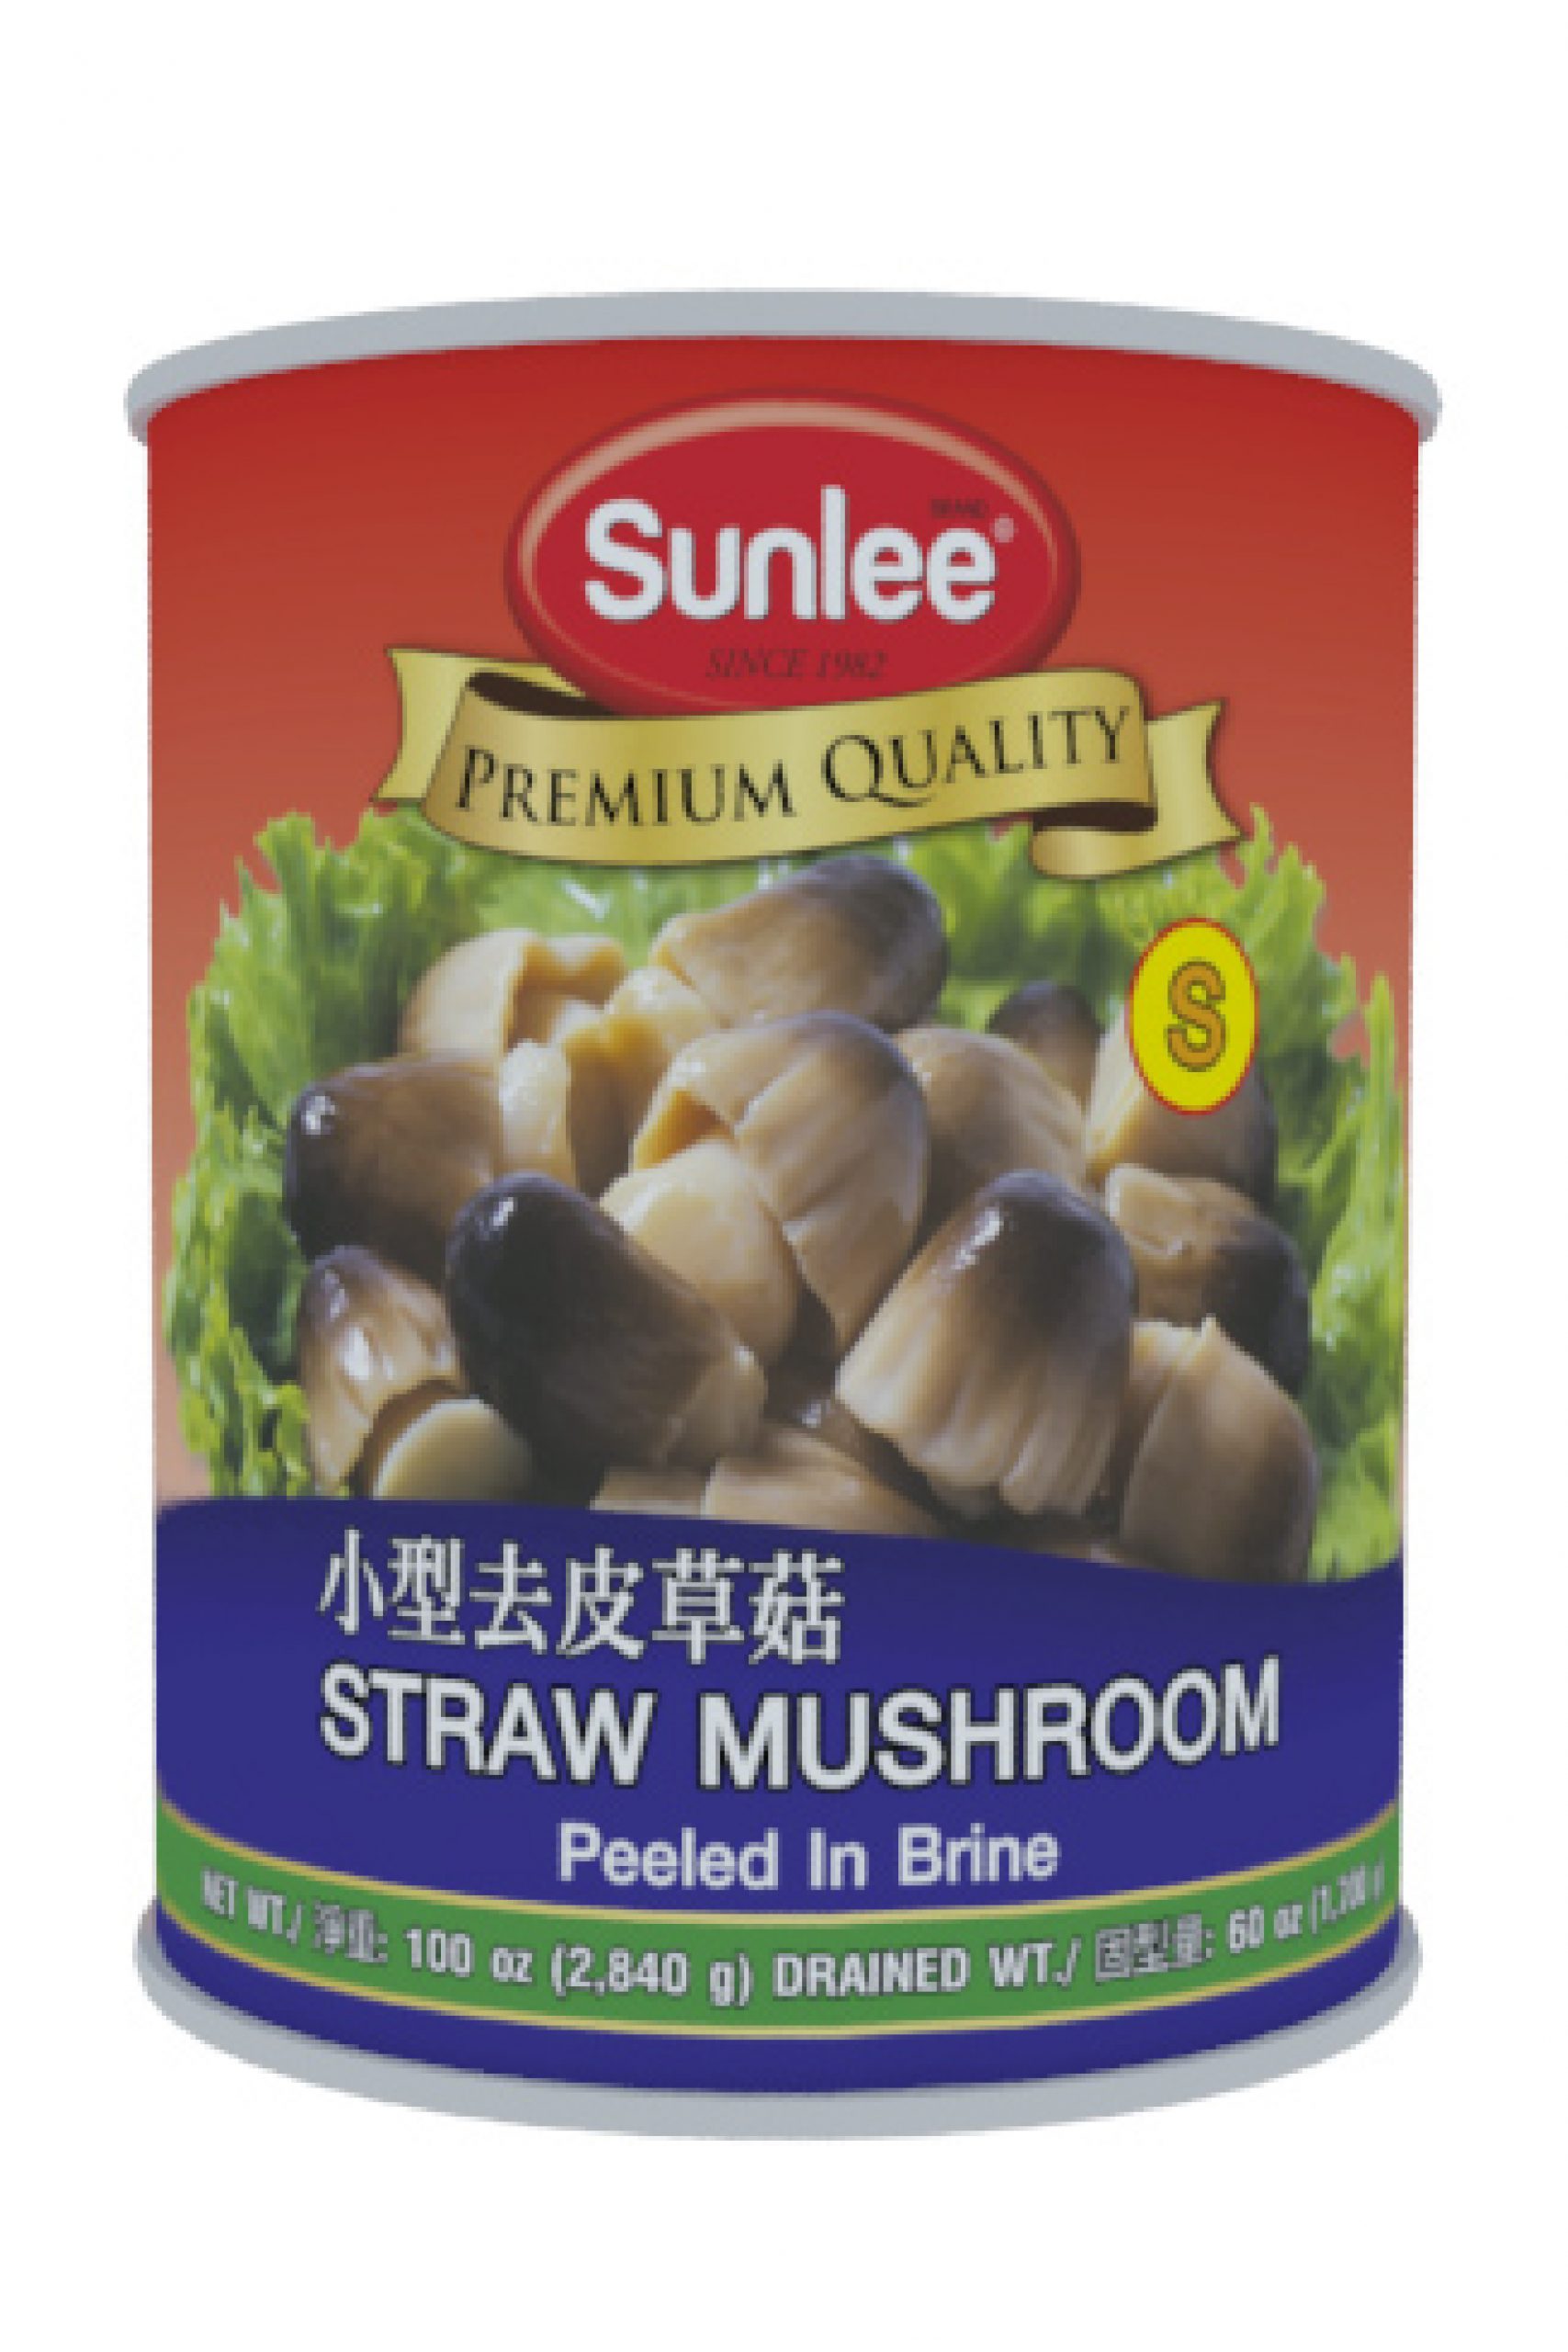 Straw mushrooms, פטריות קש, Hed Fang. A must in Tom Yam so…